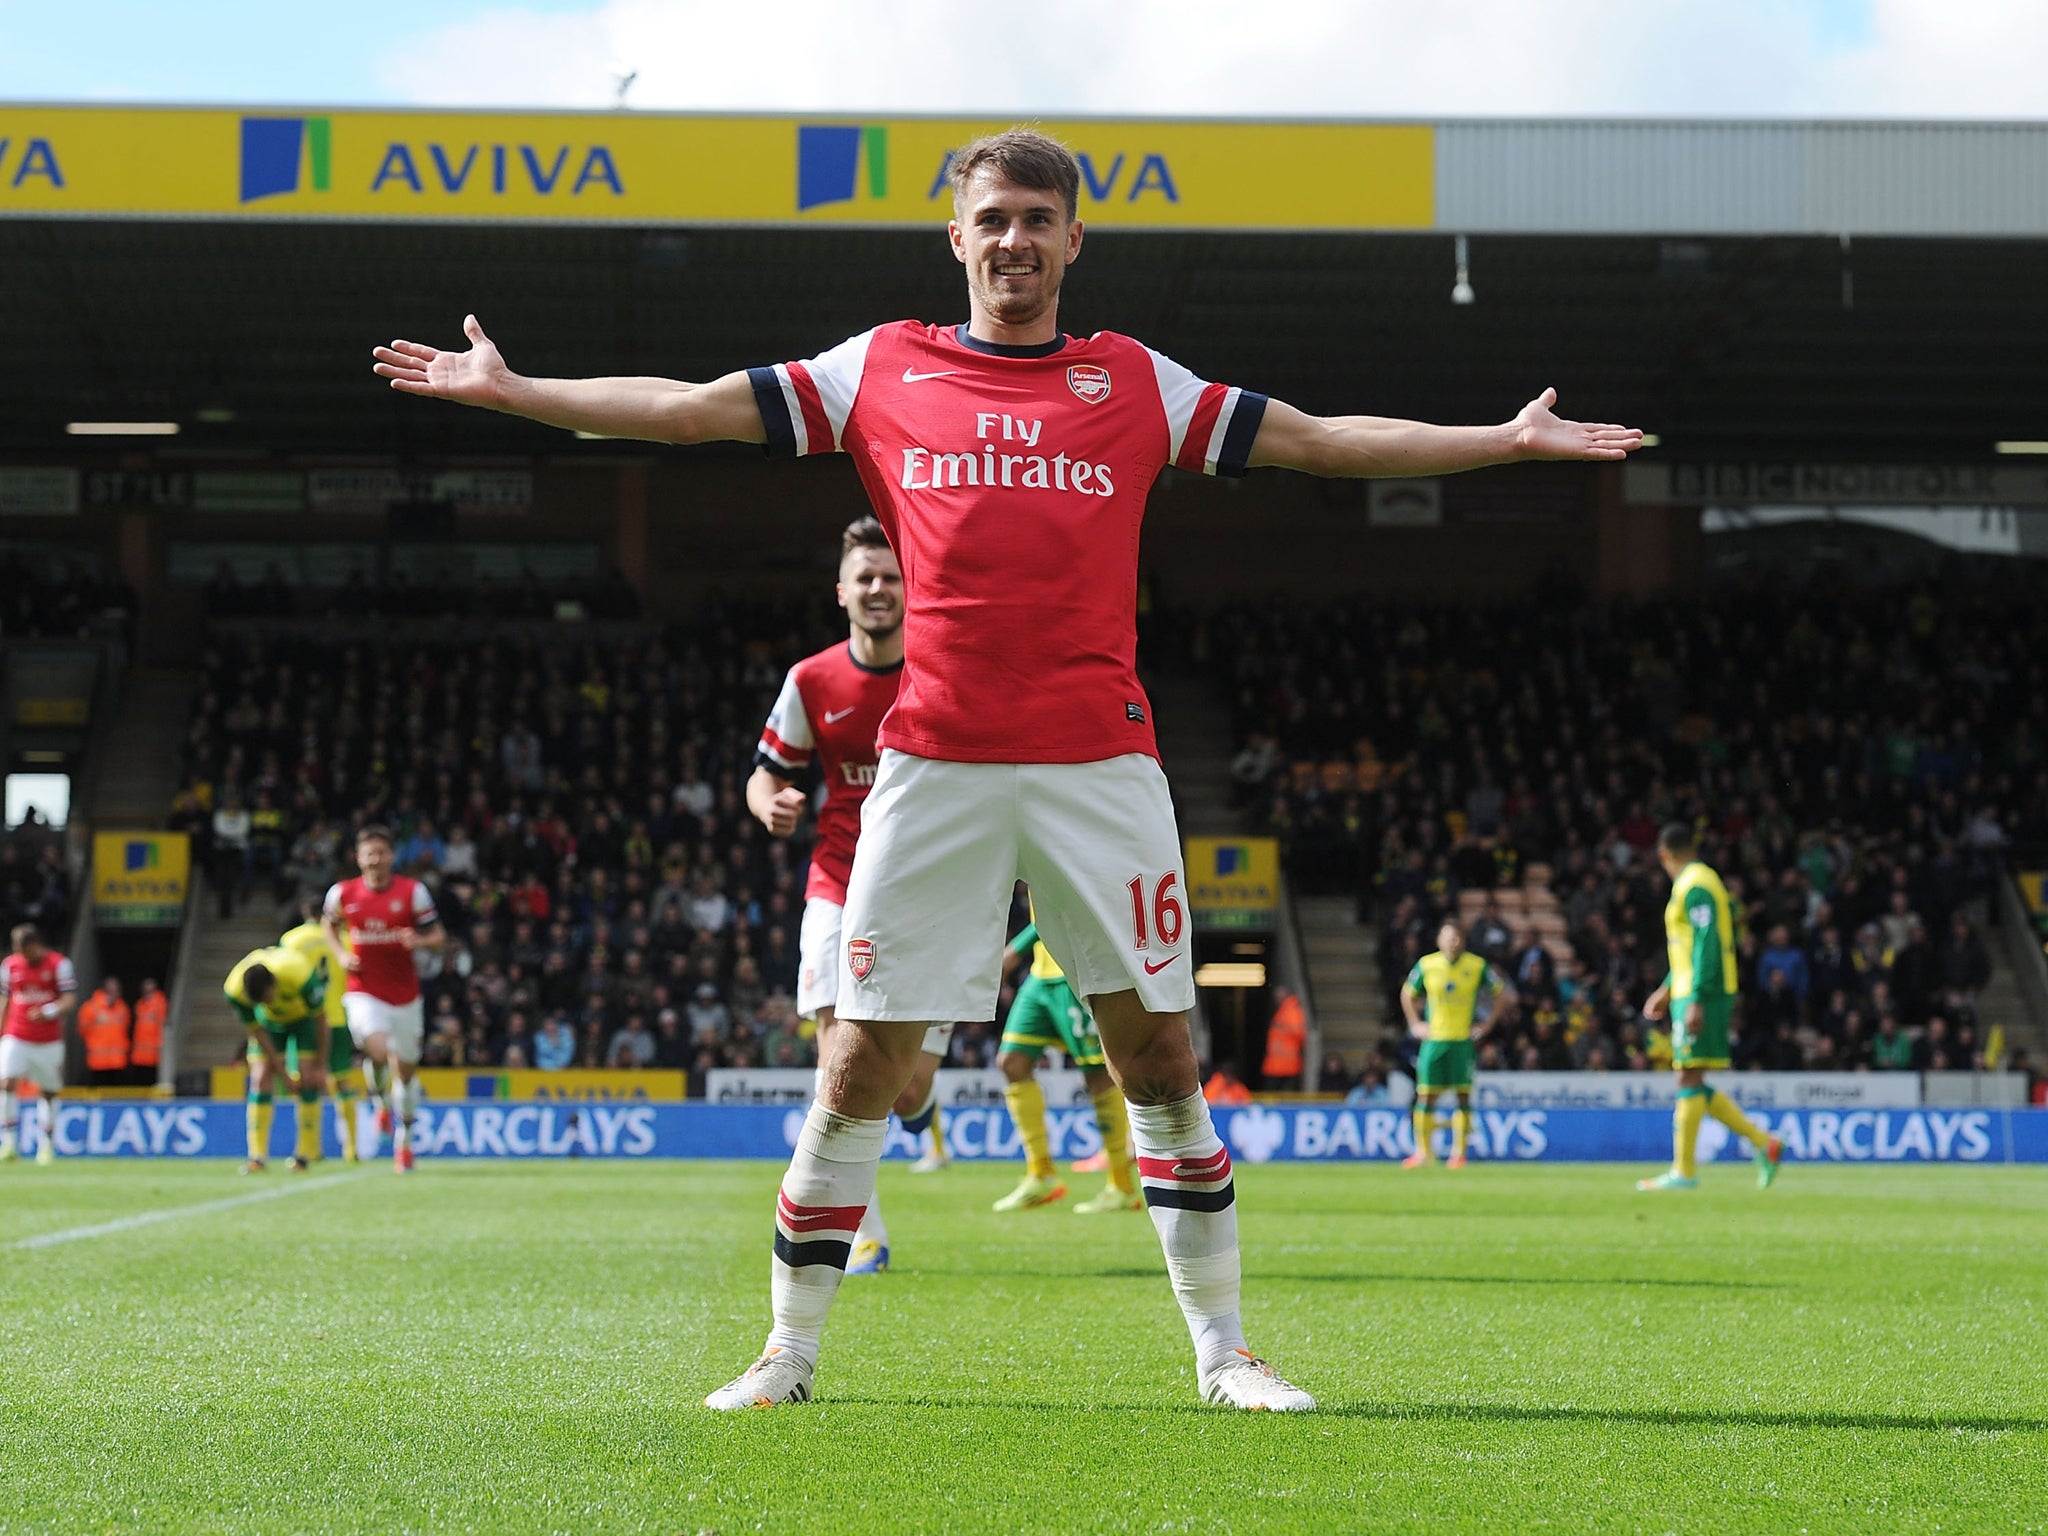 Aaron Ramsey celebrates scoring for Arsenal against Norwich on the final day of the season